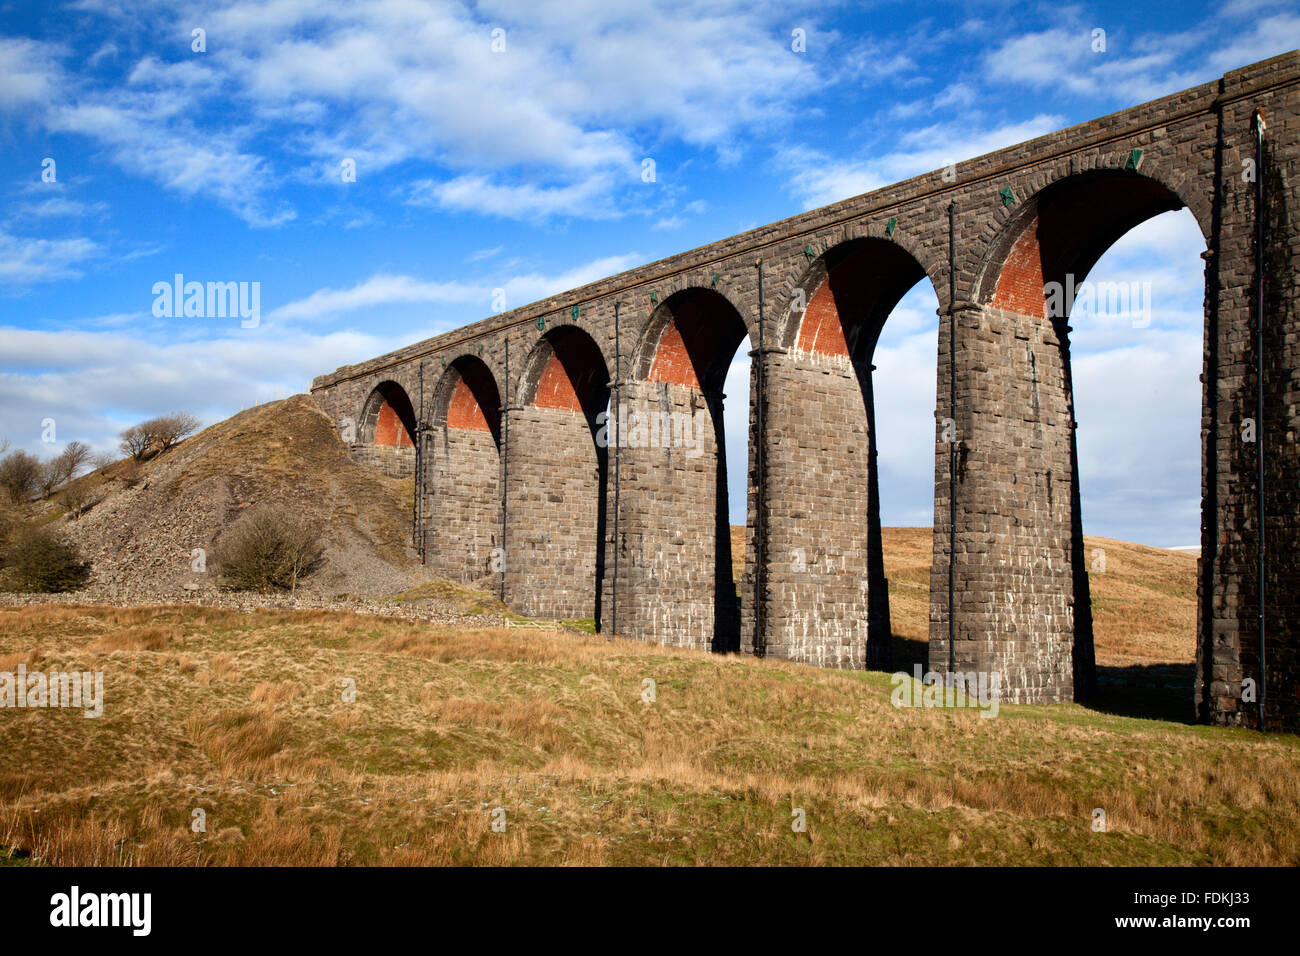 Arches of the Ribblehead Viaduct Ribblehead Yorkshire Dales England Stock Photo